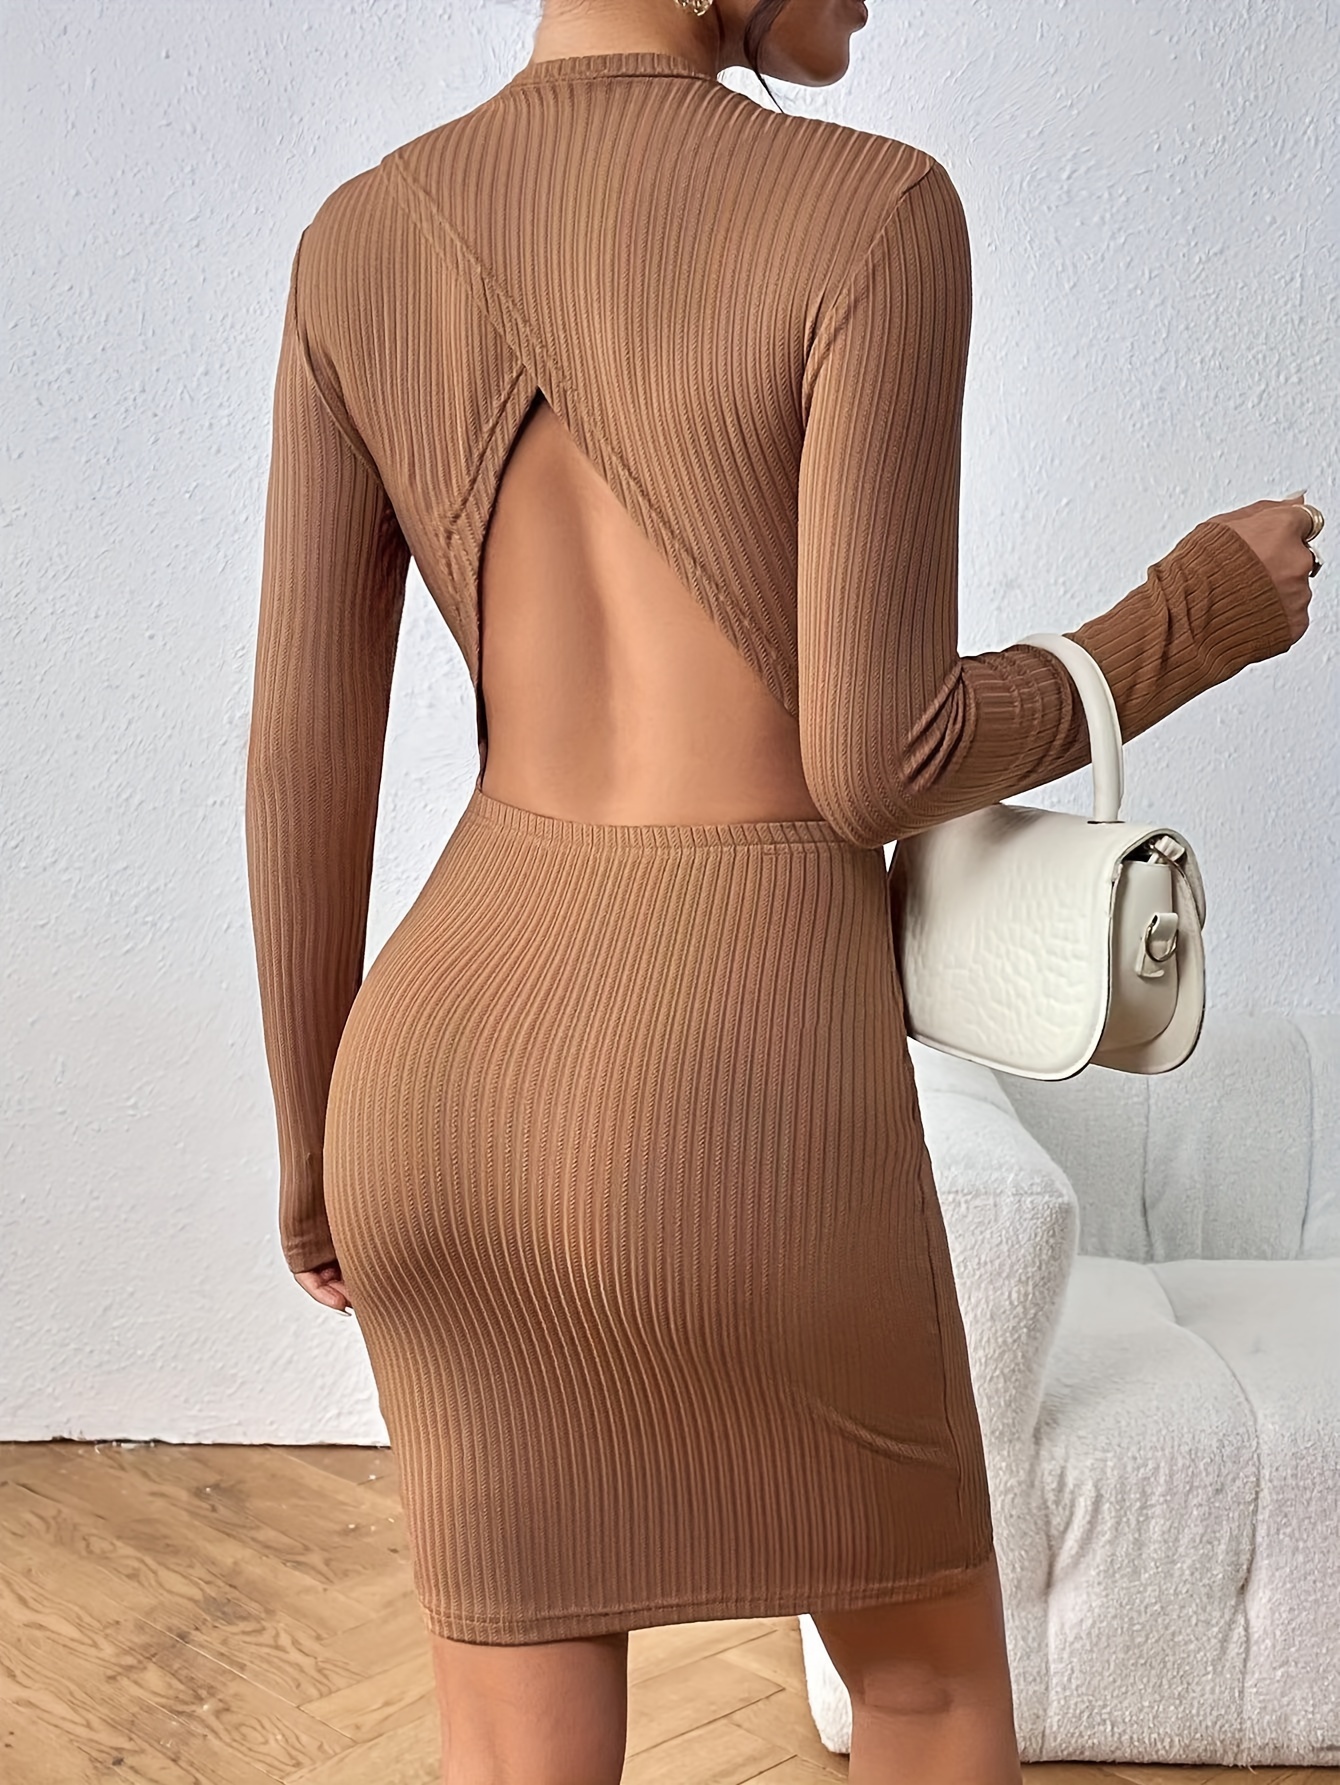 Backless Party See Dress, Sleeve Backless Knitted Dress